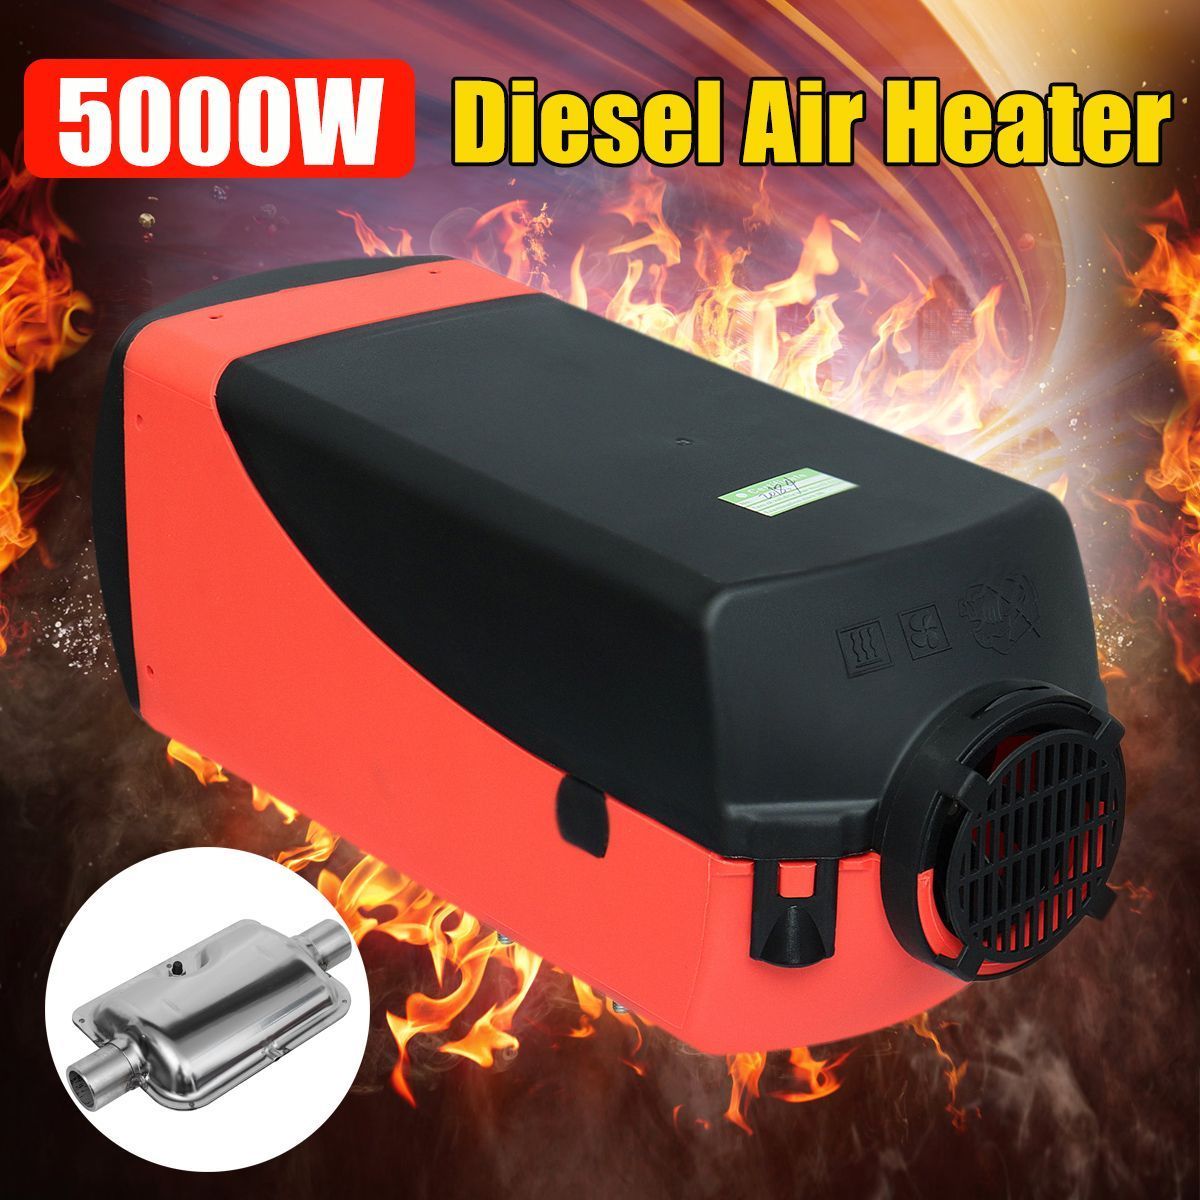 12V-5000W-Car-Parking-Diesel-Air-Heater-Small-Digital-Switch-with-Universal-Free-Muffler-1336112